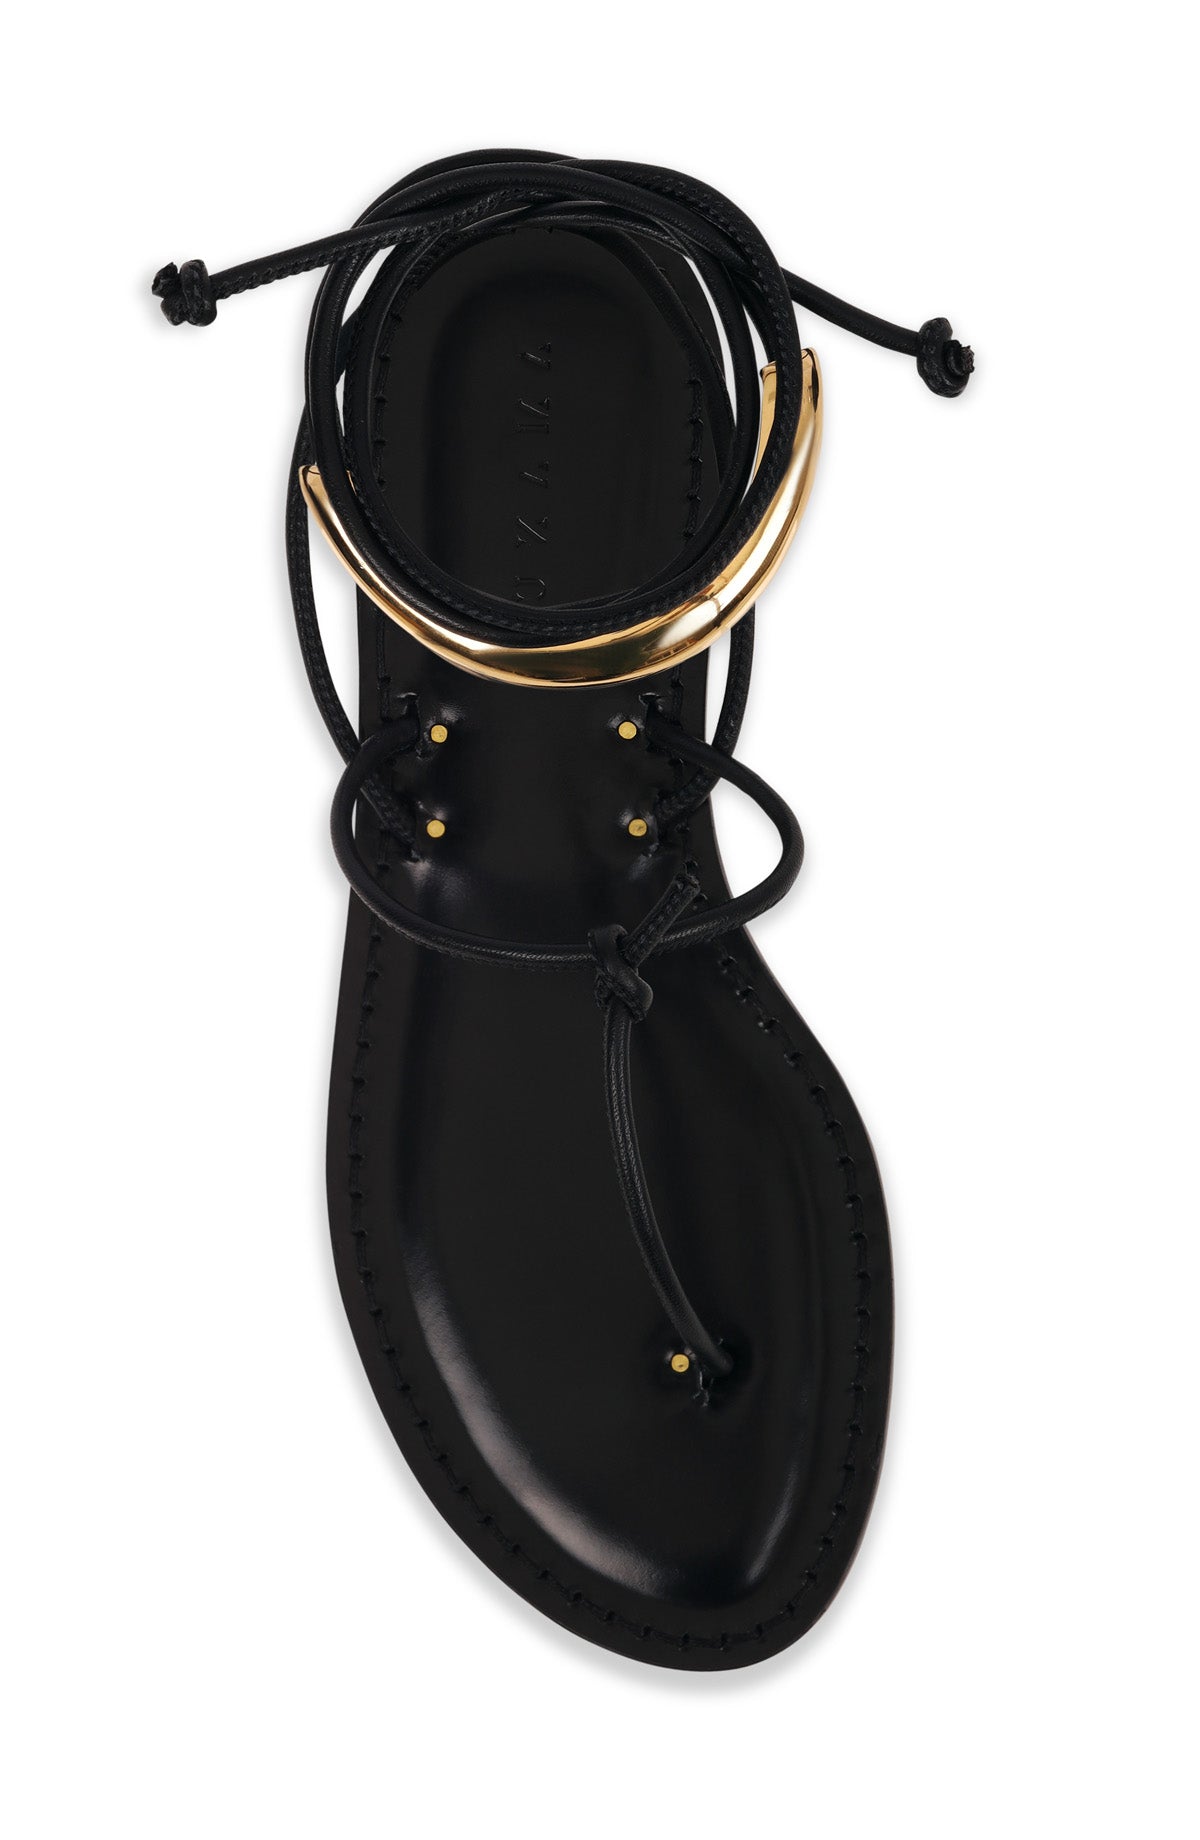 Style 26 | The Delta | 14k Gold Plated Anklet + Skinny Black Leather Cord | Black Sole